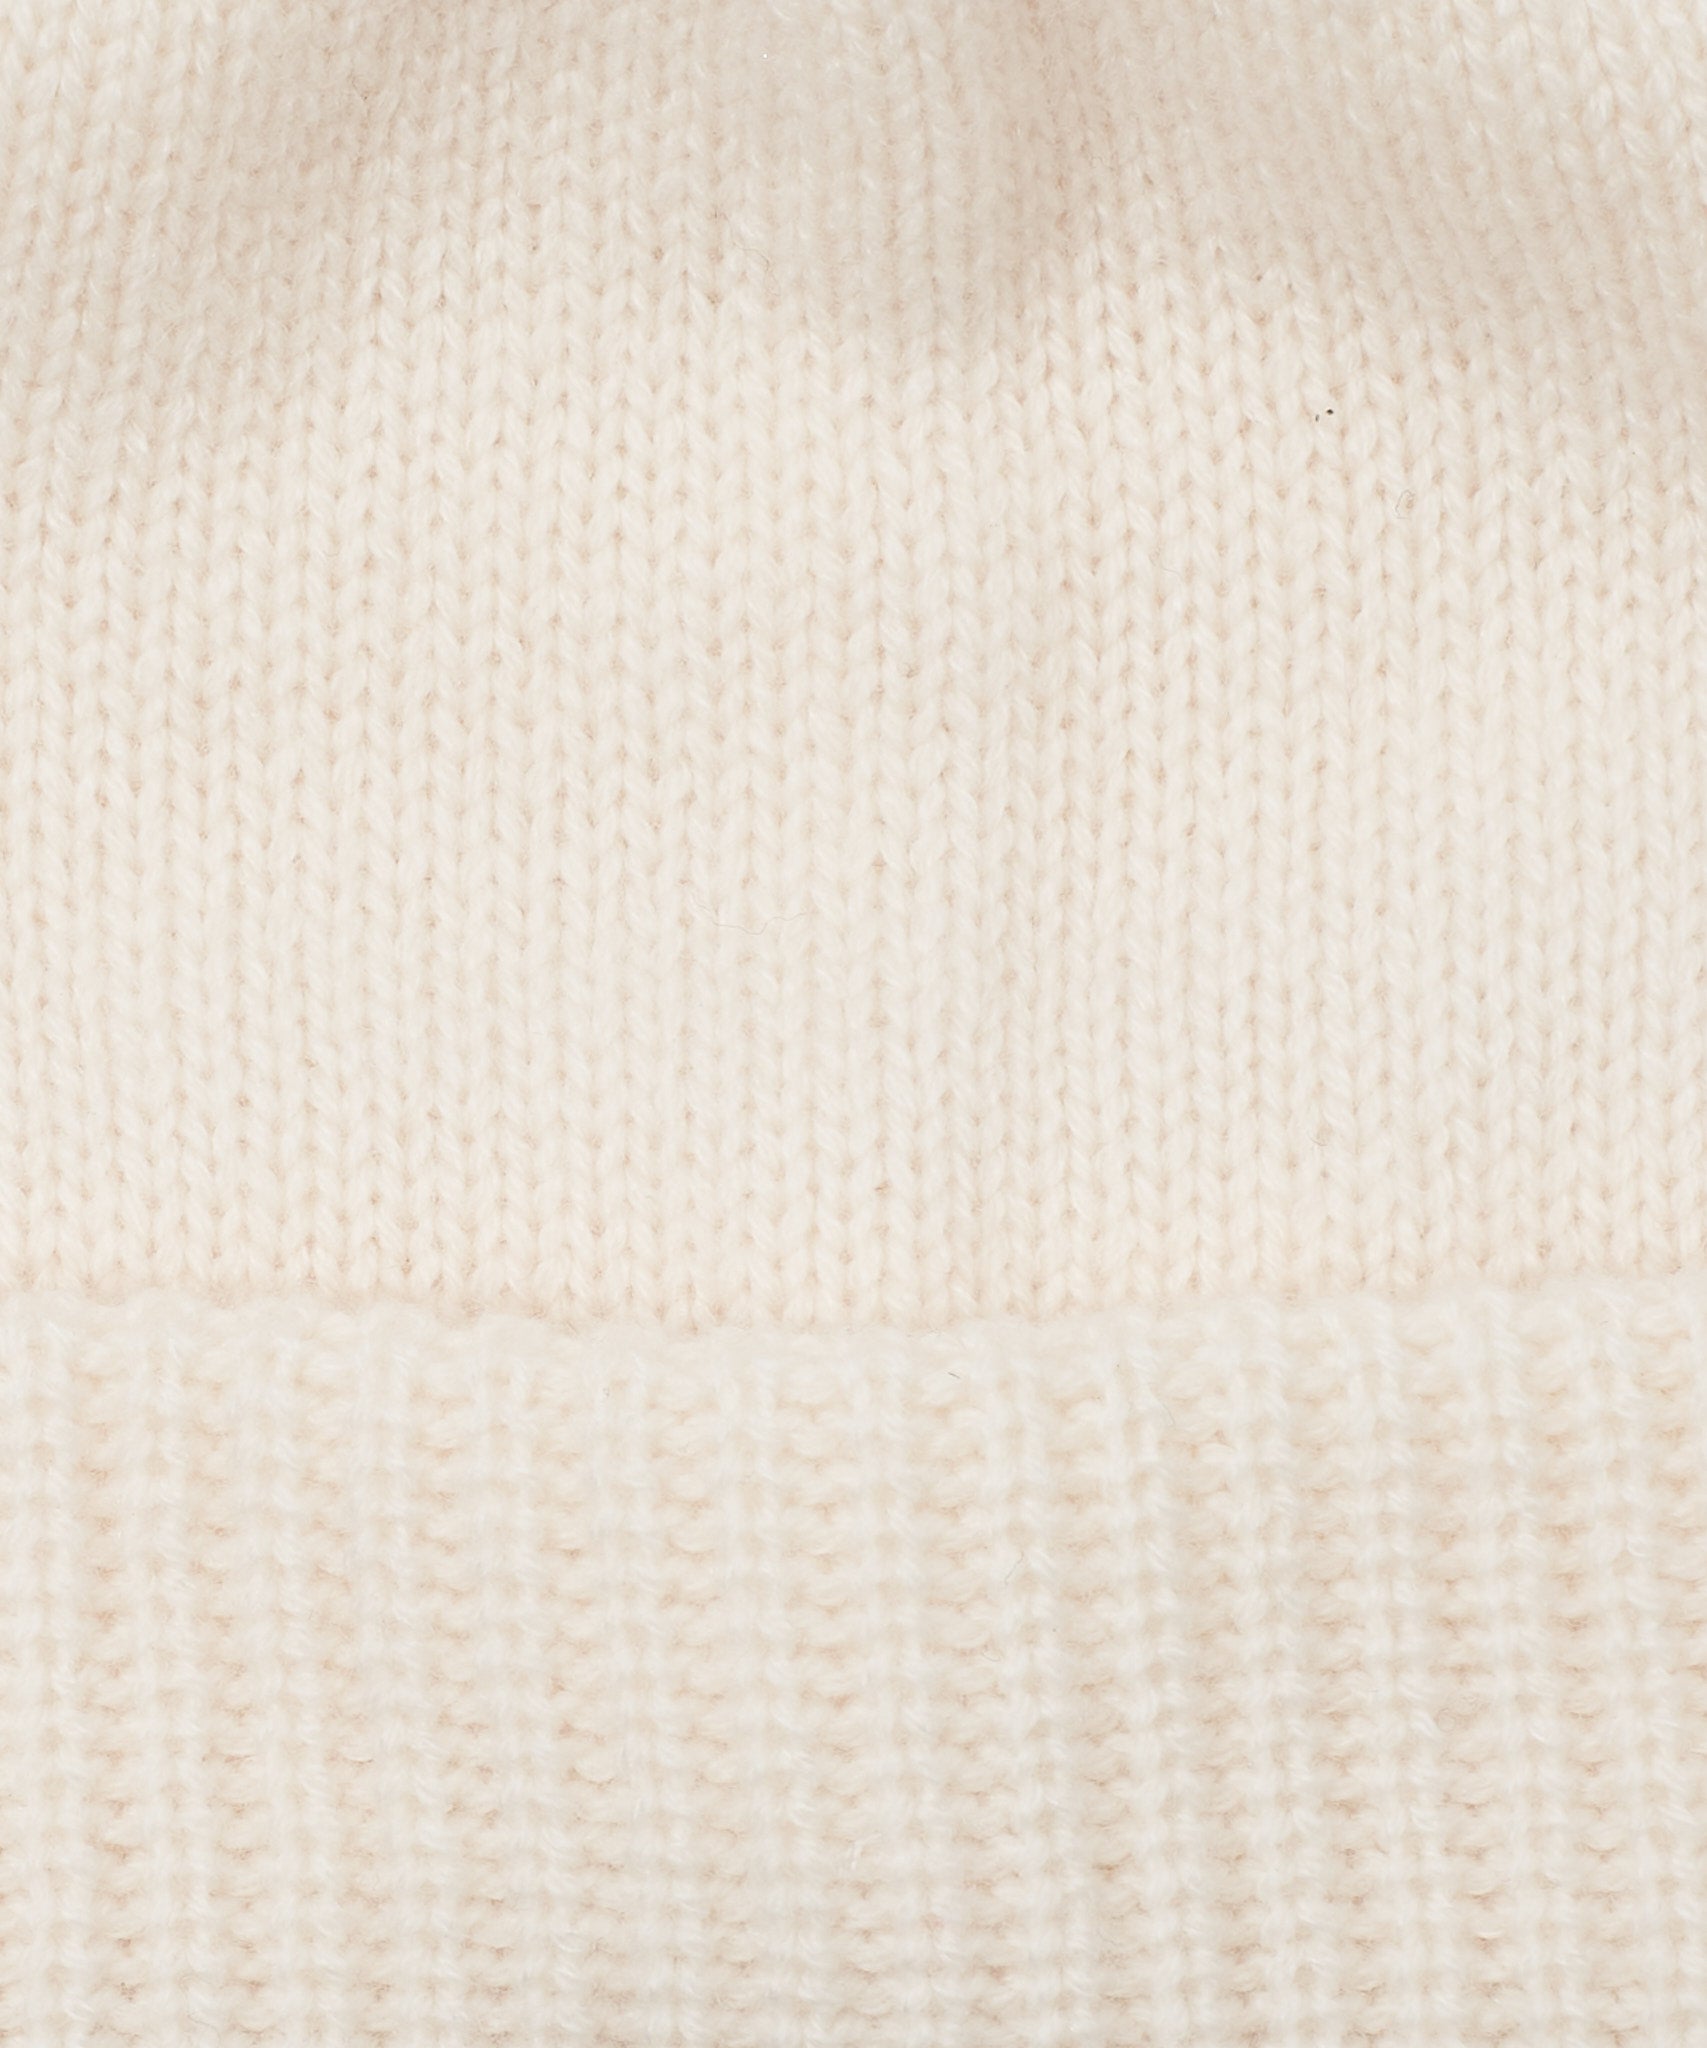 Wool/Cashmere Lofty Beanie in color Cream